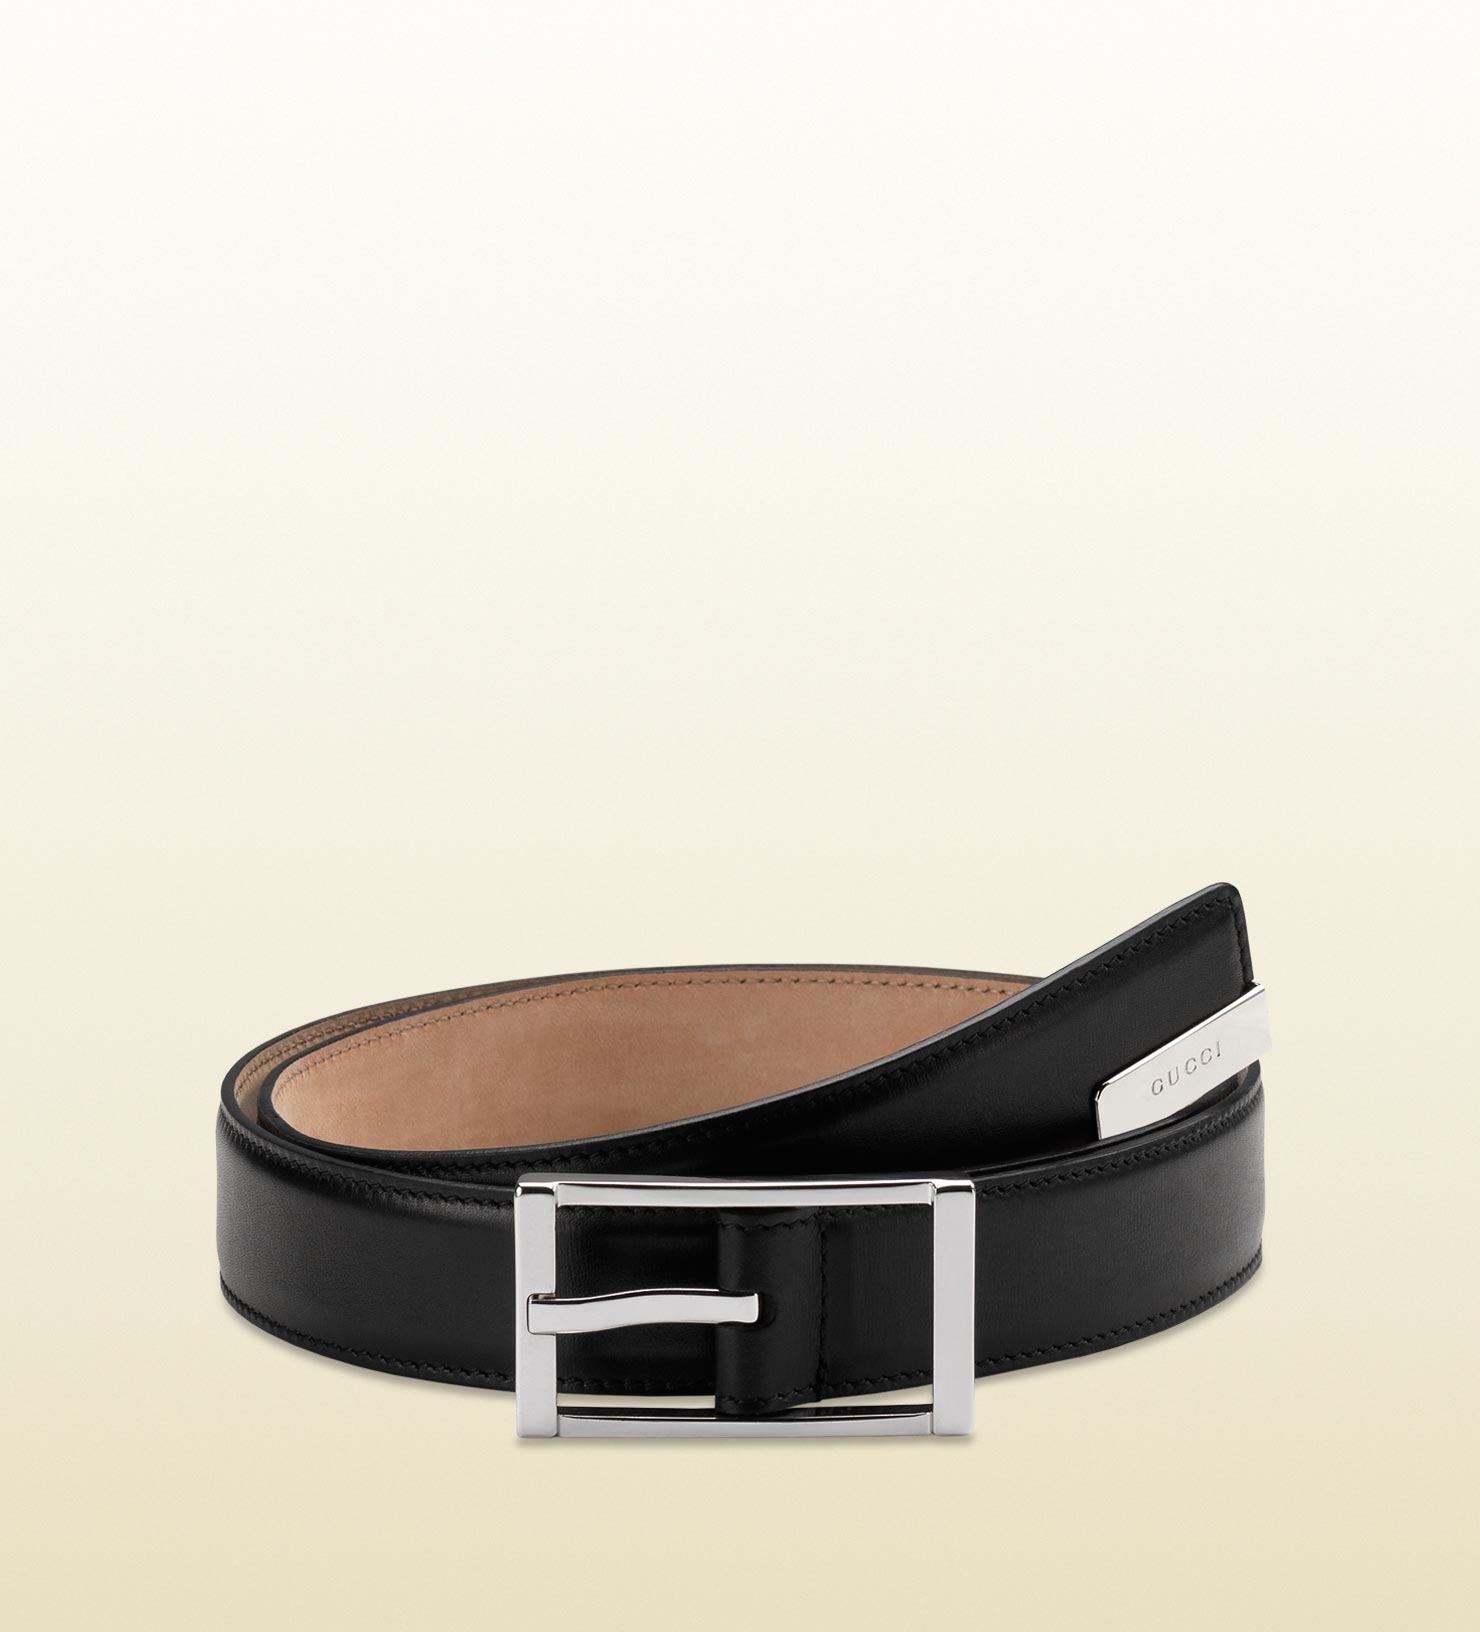 Lyst - Gucci Black Leather Belt With Rectangular Buckle in Black for Men